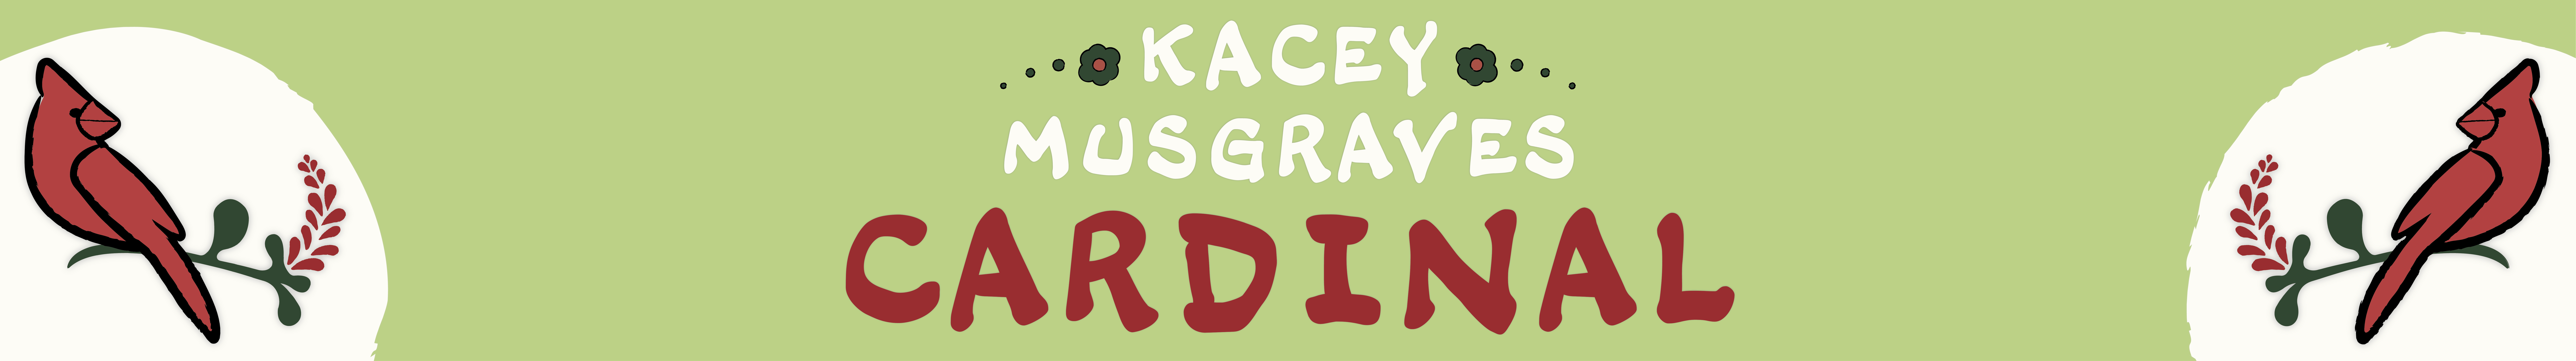 A graphic of a white circle with a red cardinal on a tree branch within the circle. The background outside the circle is green with text that says "Kacey Musgraves, Cardinal, WERS 88.9 FM Pick of the Week"